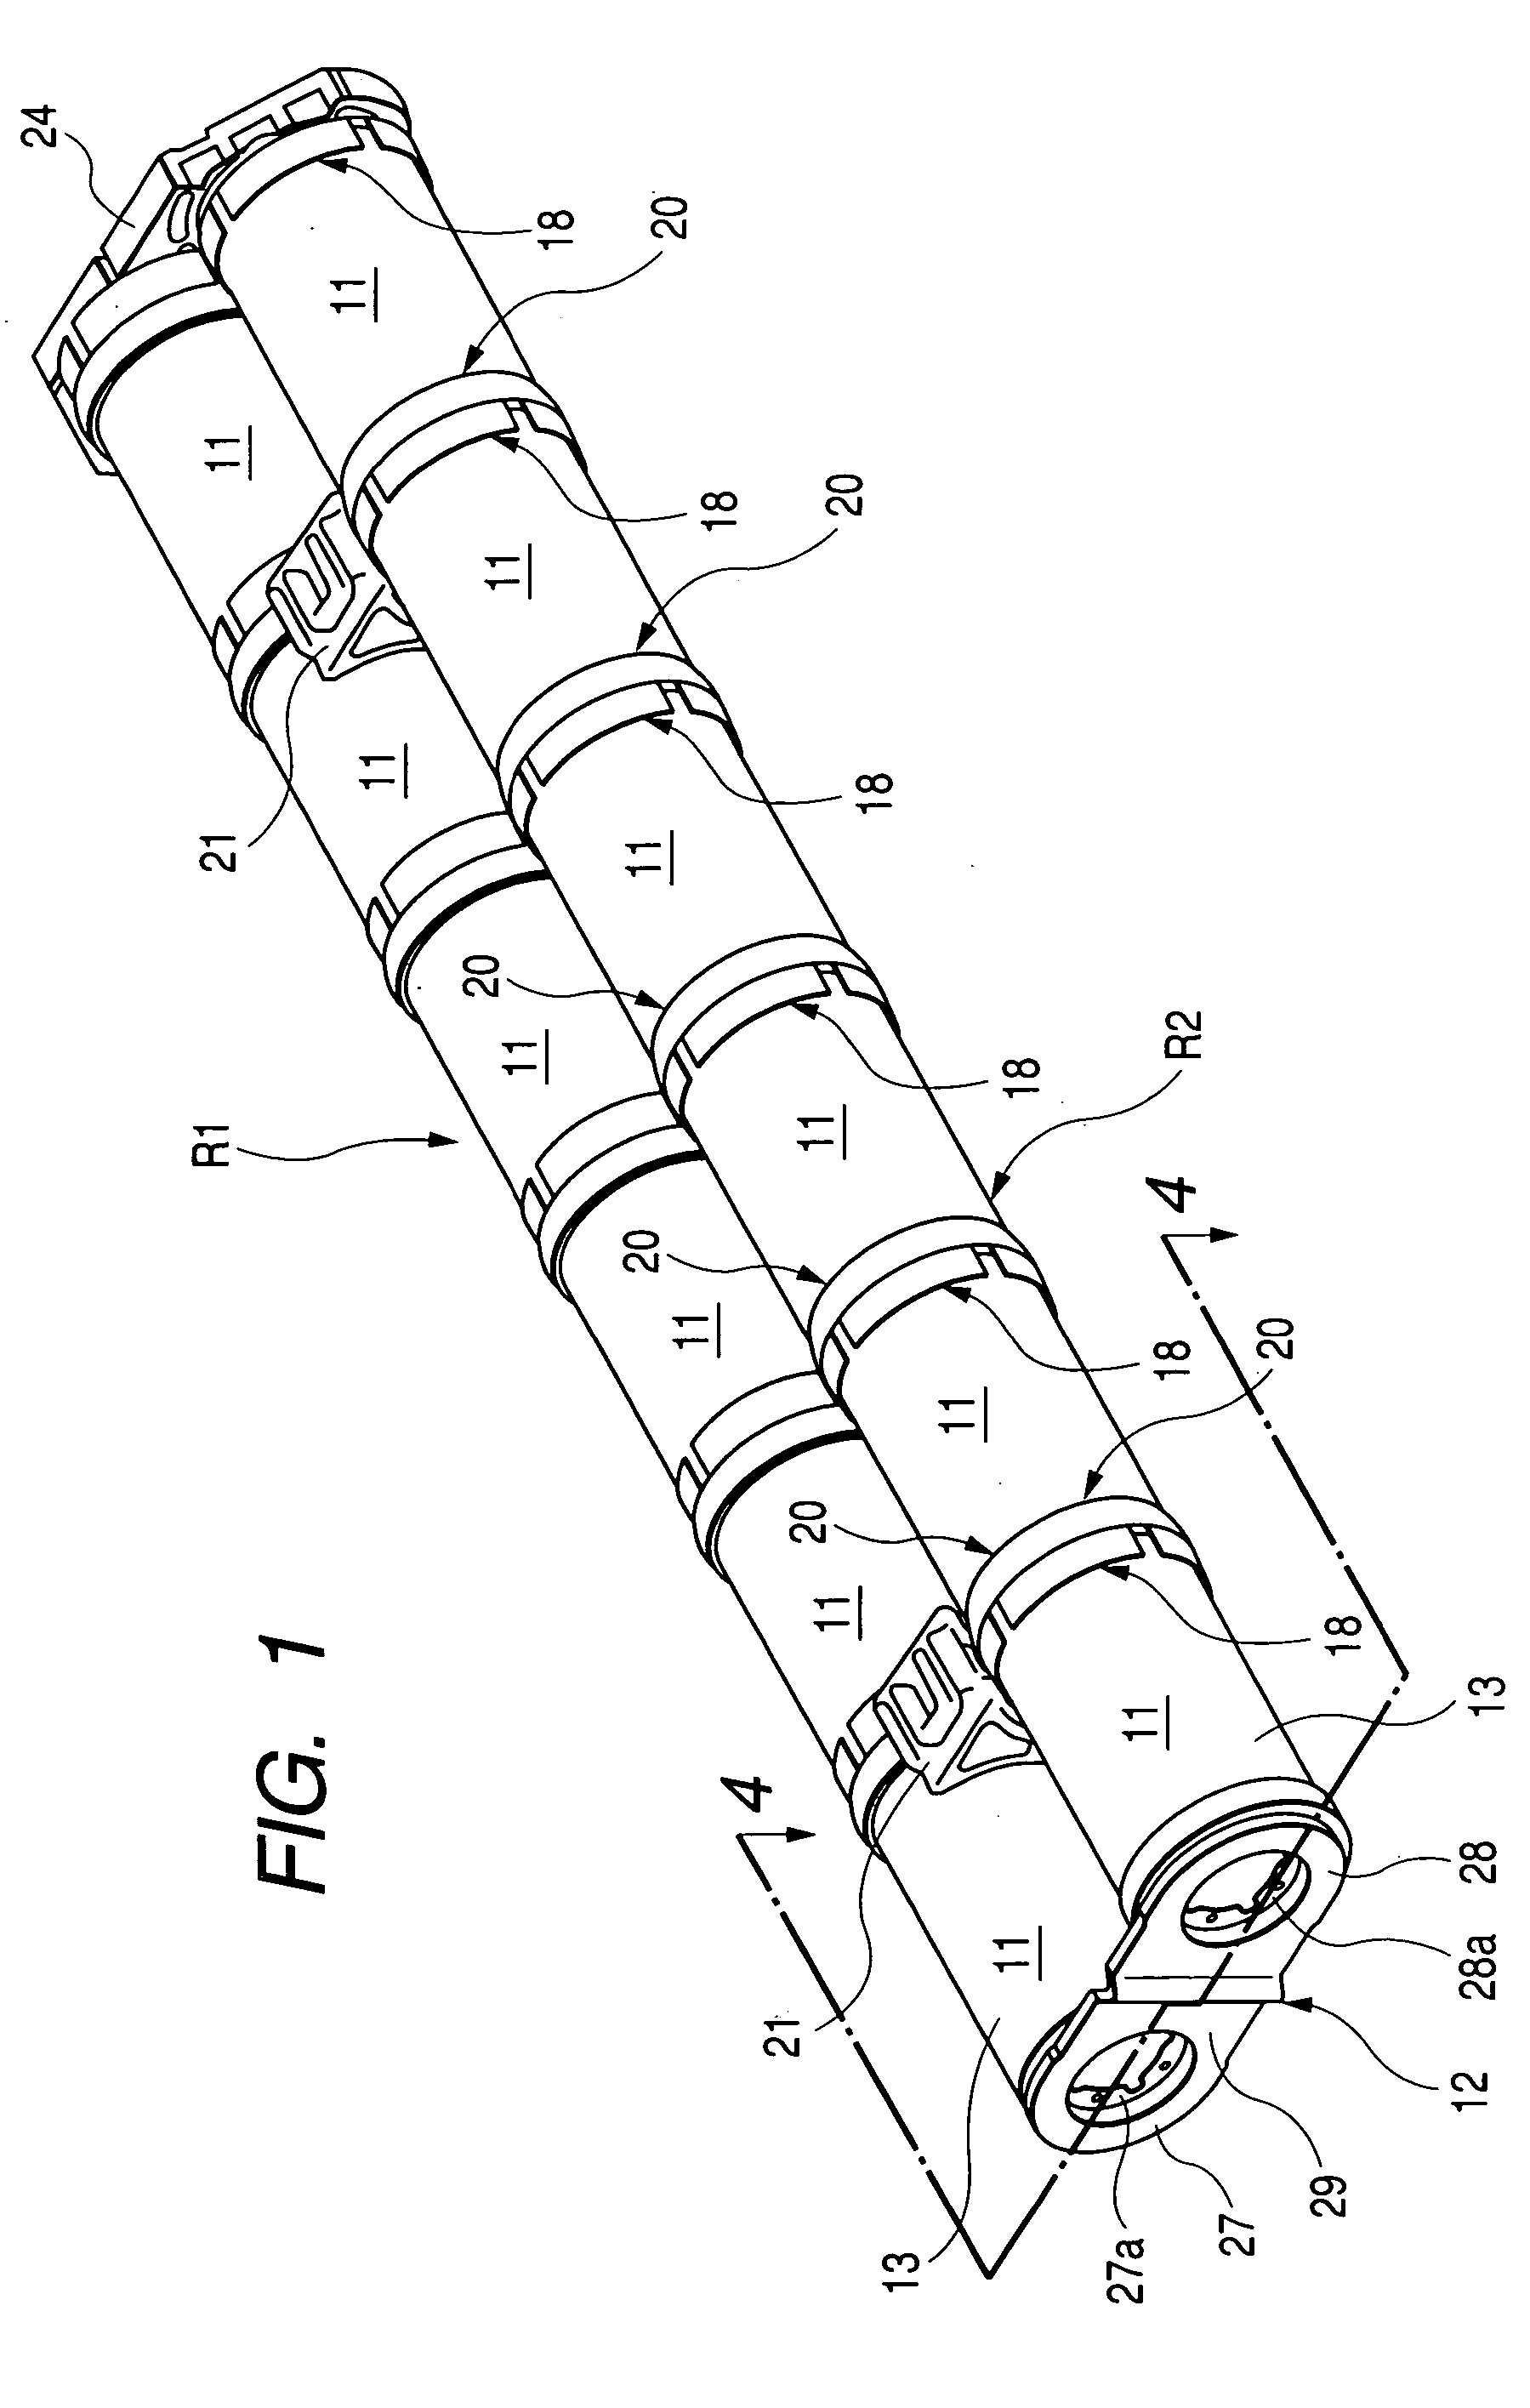 Connecting structure for electric cells